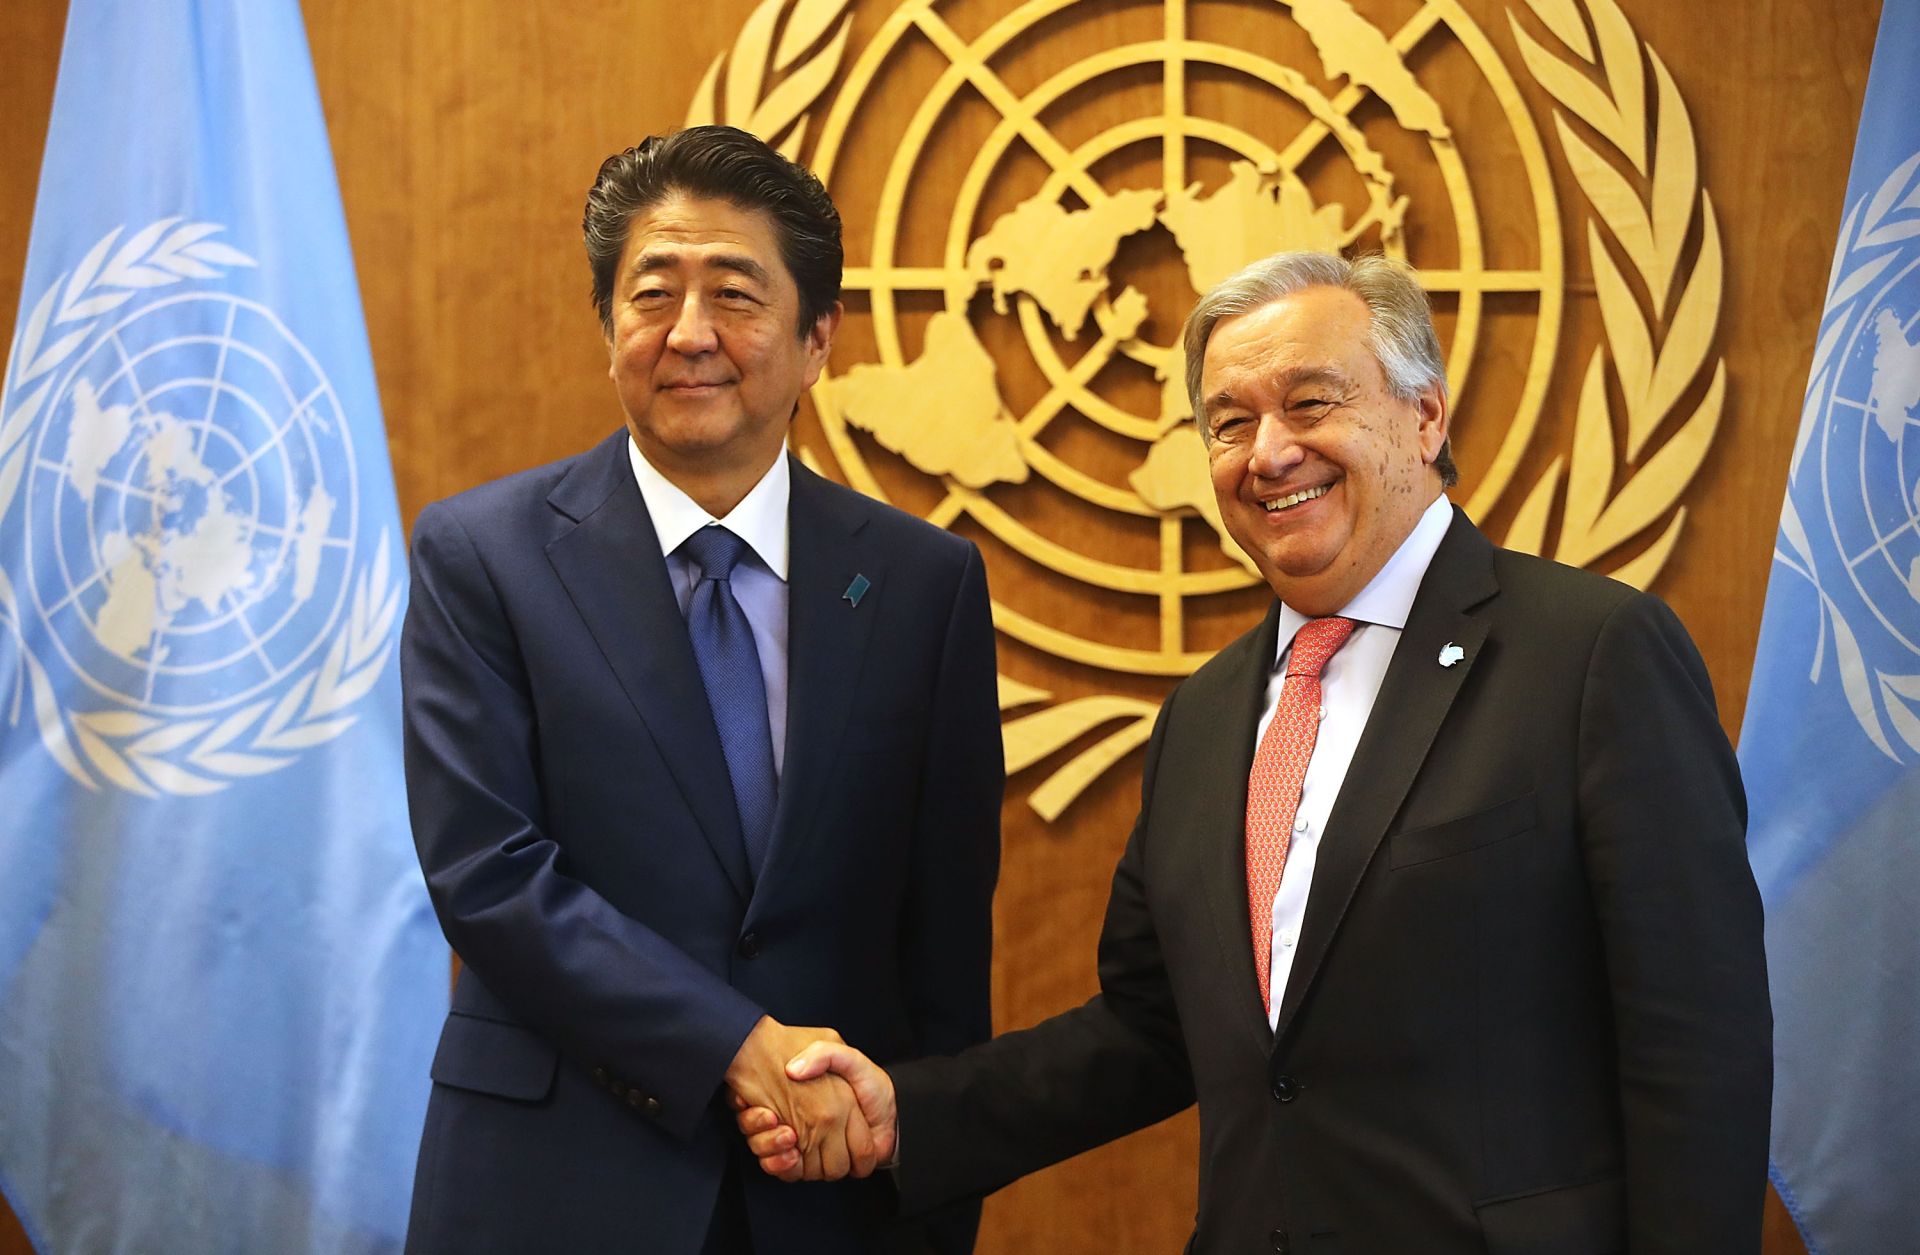 Then-Japanese Prime Minister Shinzo Abe shakes hands with the Secretary-General of the United Nations in New York City during the 73rd U.N. General Assembly on Sept. 25, 2018. 